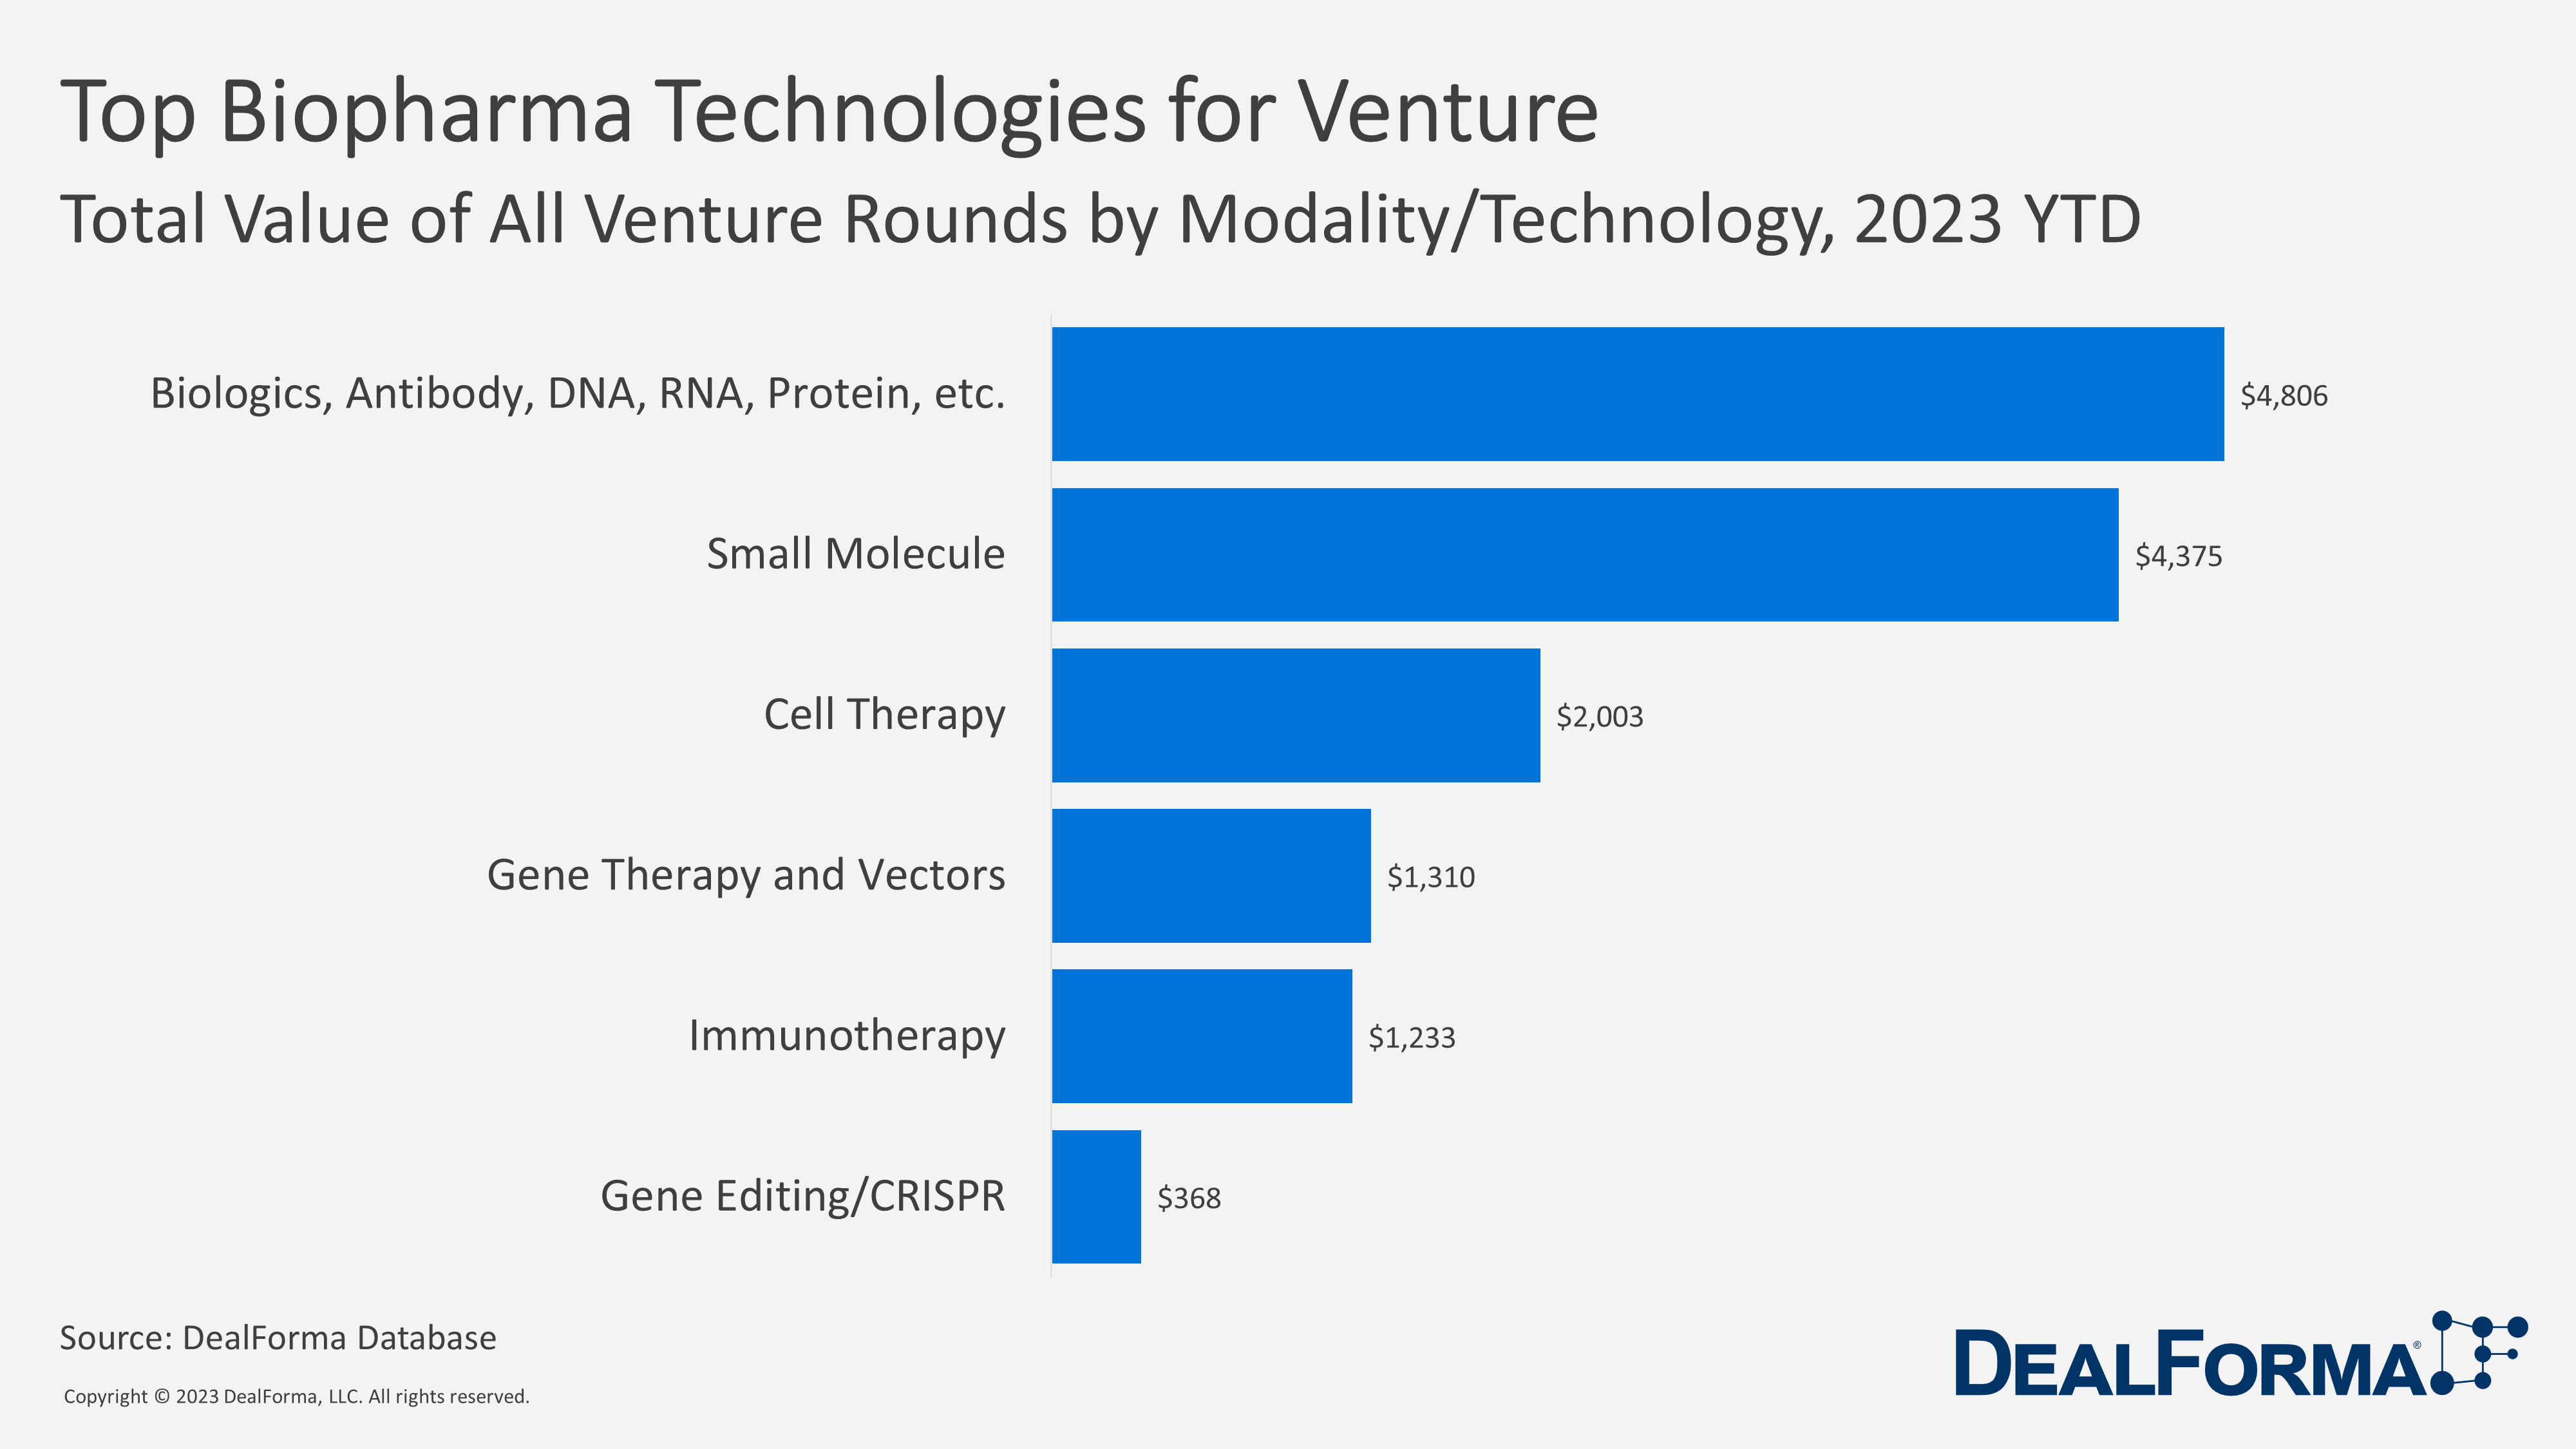 Top Biopharma Technologies for Venture. Total Value, All Venture Rounds, YTD 2023 - DealForma